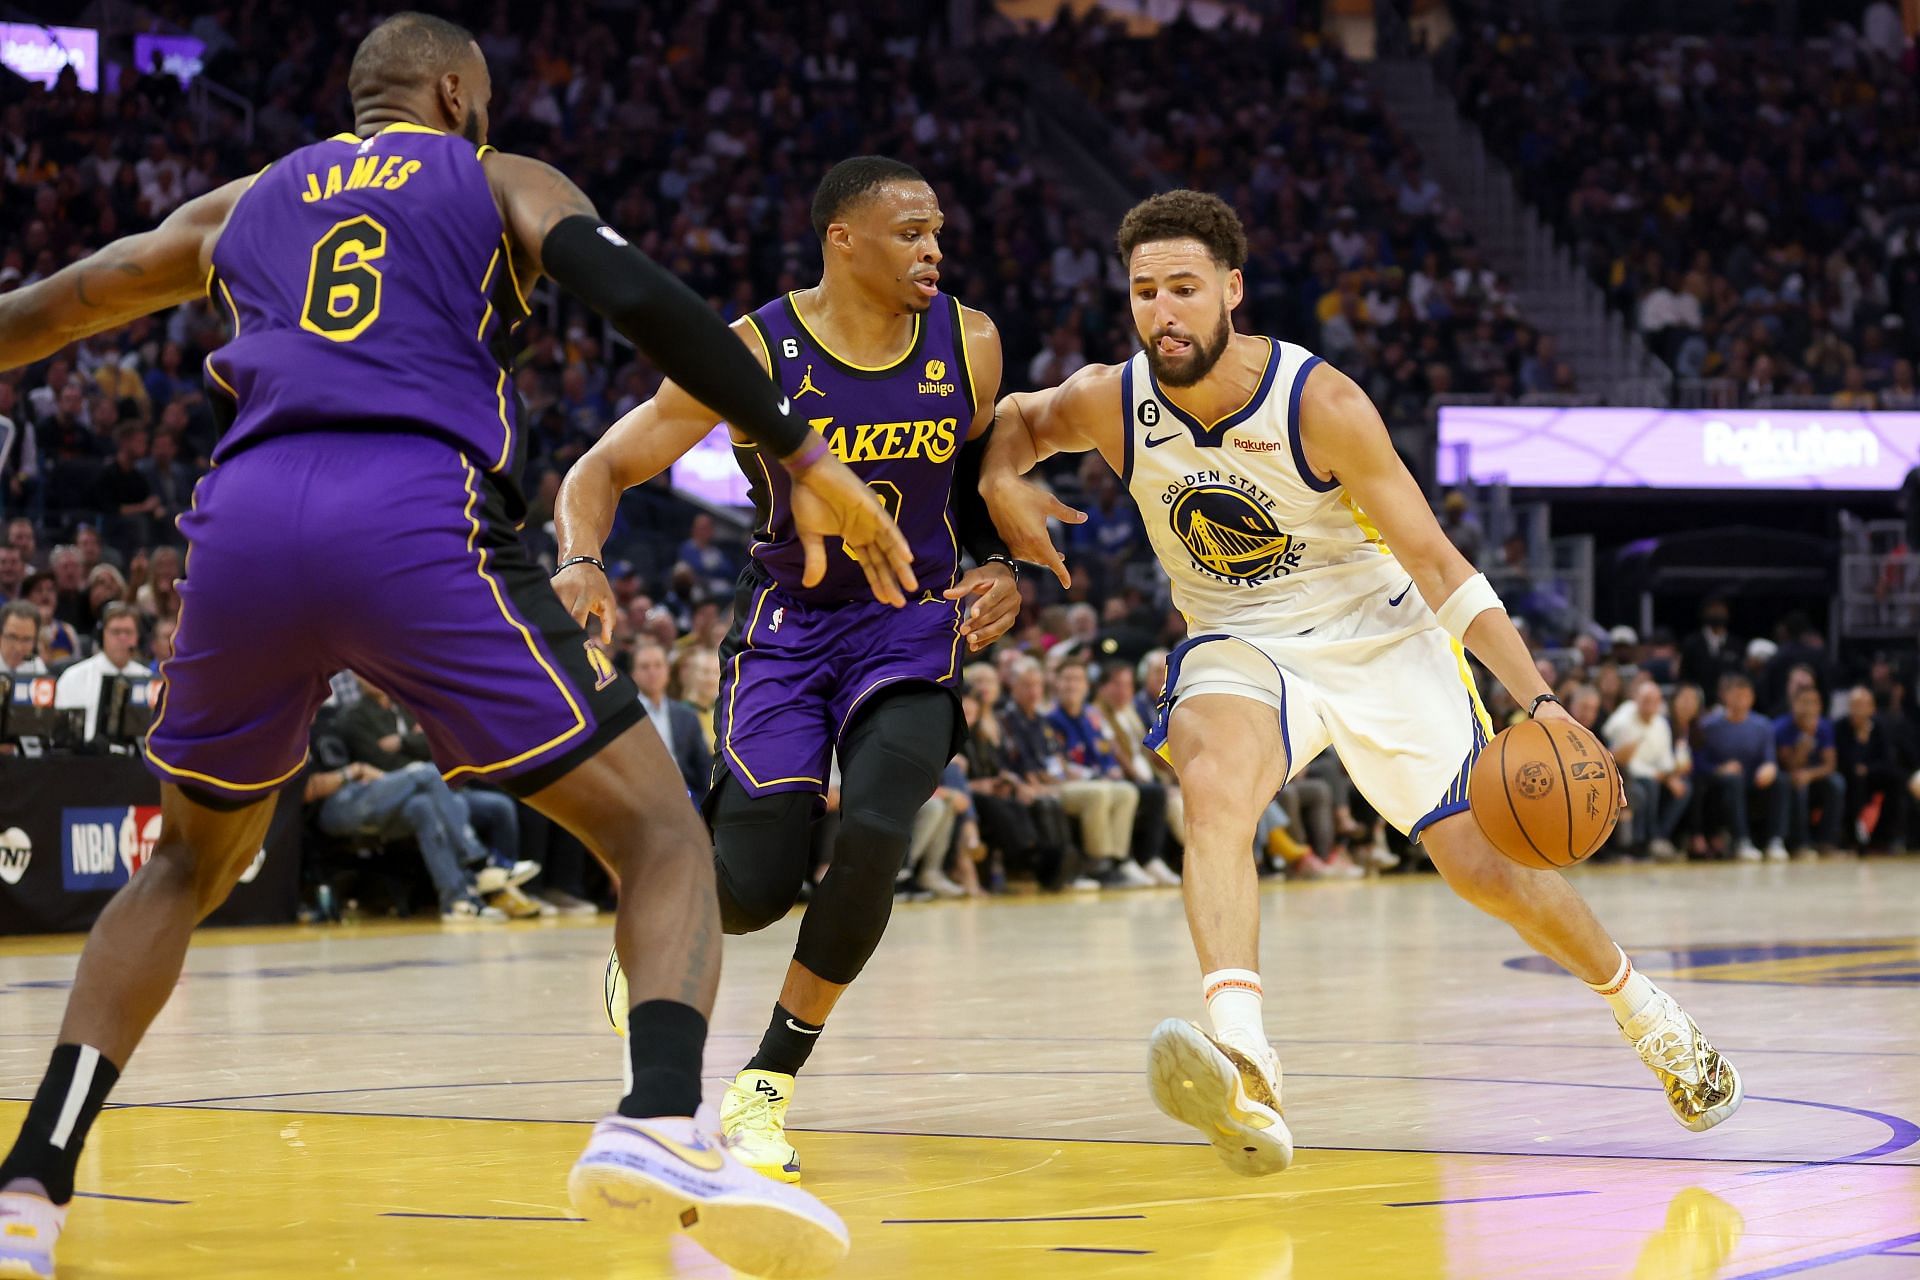 Klay Thompson of the Golden State Warriors is guarded by Russell Westbrook of the Los Angeles Lakers